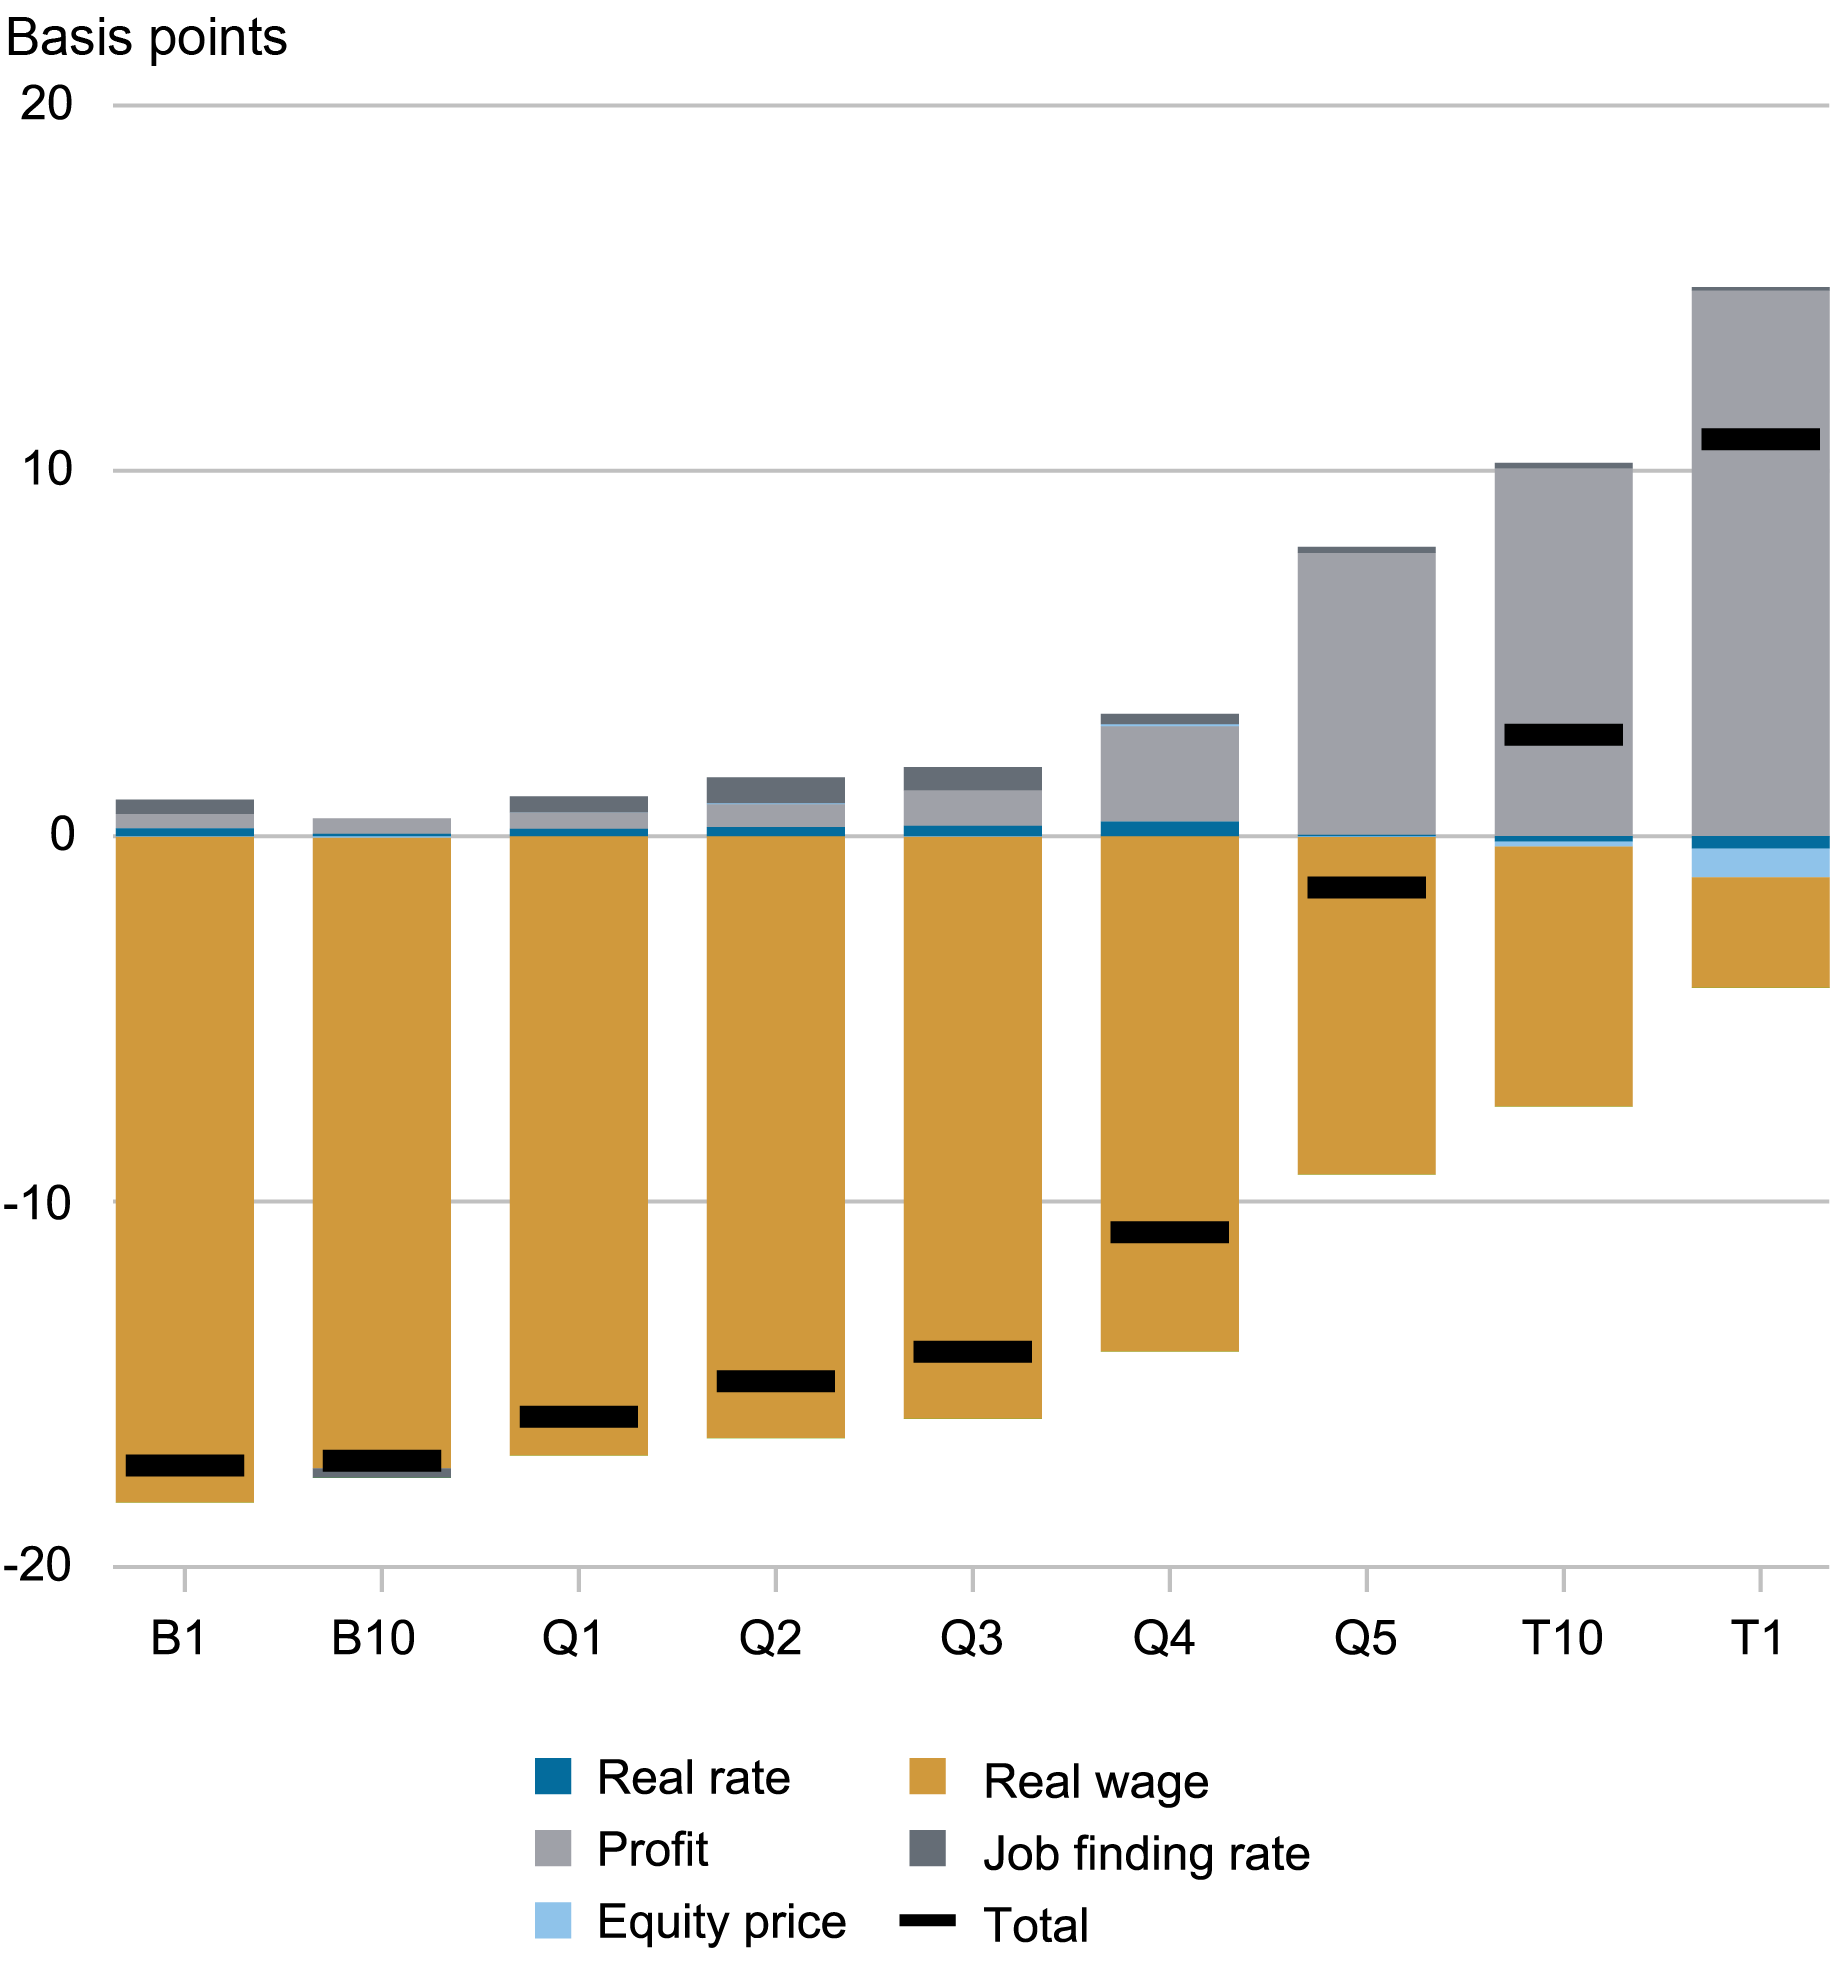 bar chart tracking the effects of cost push shocks by basis points, from the bottom 1 percent of wealth distribution (far left) increasing to the top 1 percent of wealth distribution (far right), by real rate (dark blue), profit (light gray), equity price (light blue), real wage (gold), job finding rate (dark gray), and total (black line)